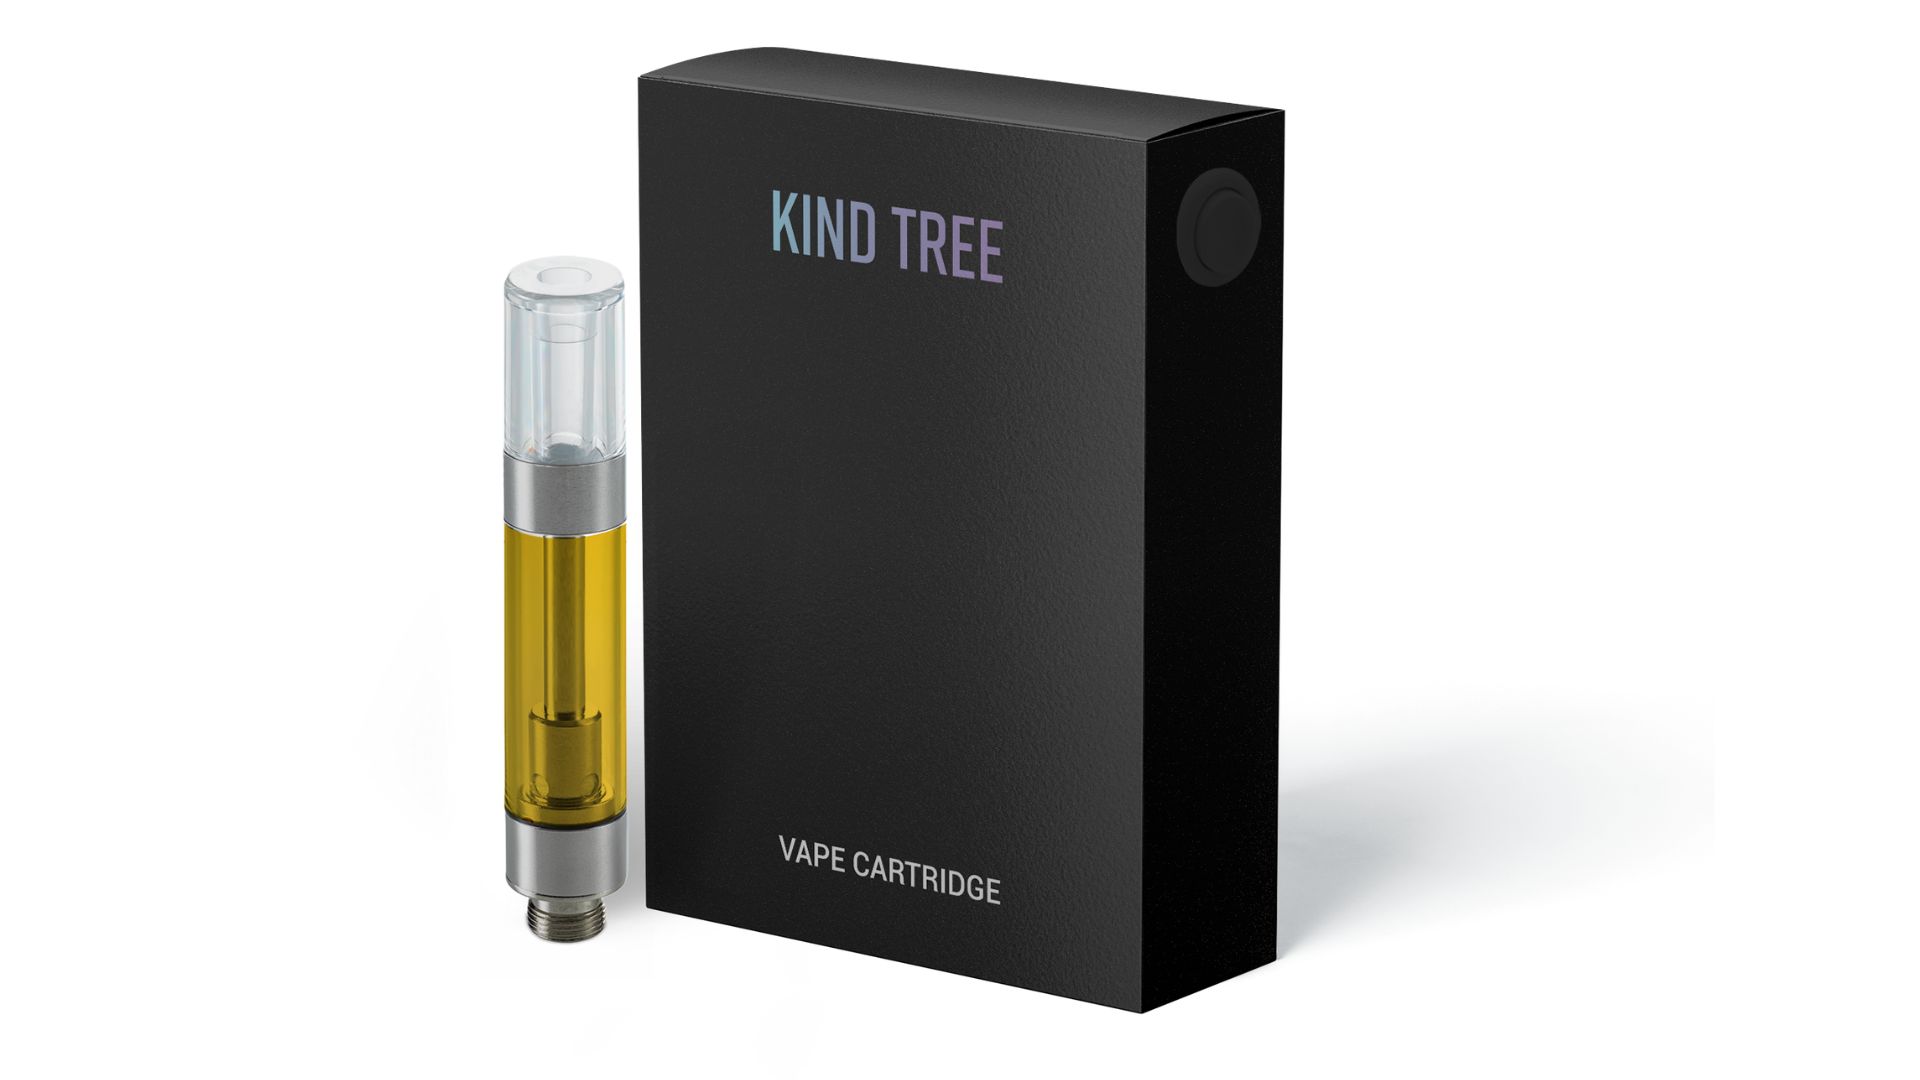 A Kind Tree vape cartridge stands next to its packaging. The package is all black with the words "Kind Tree" at the top. The cartridge is filled with an amber-colored liquid.